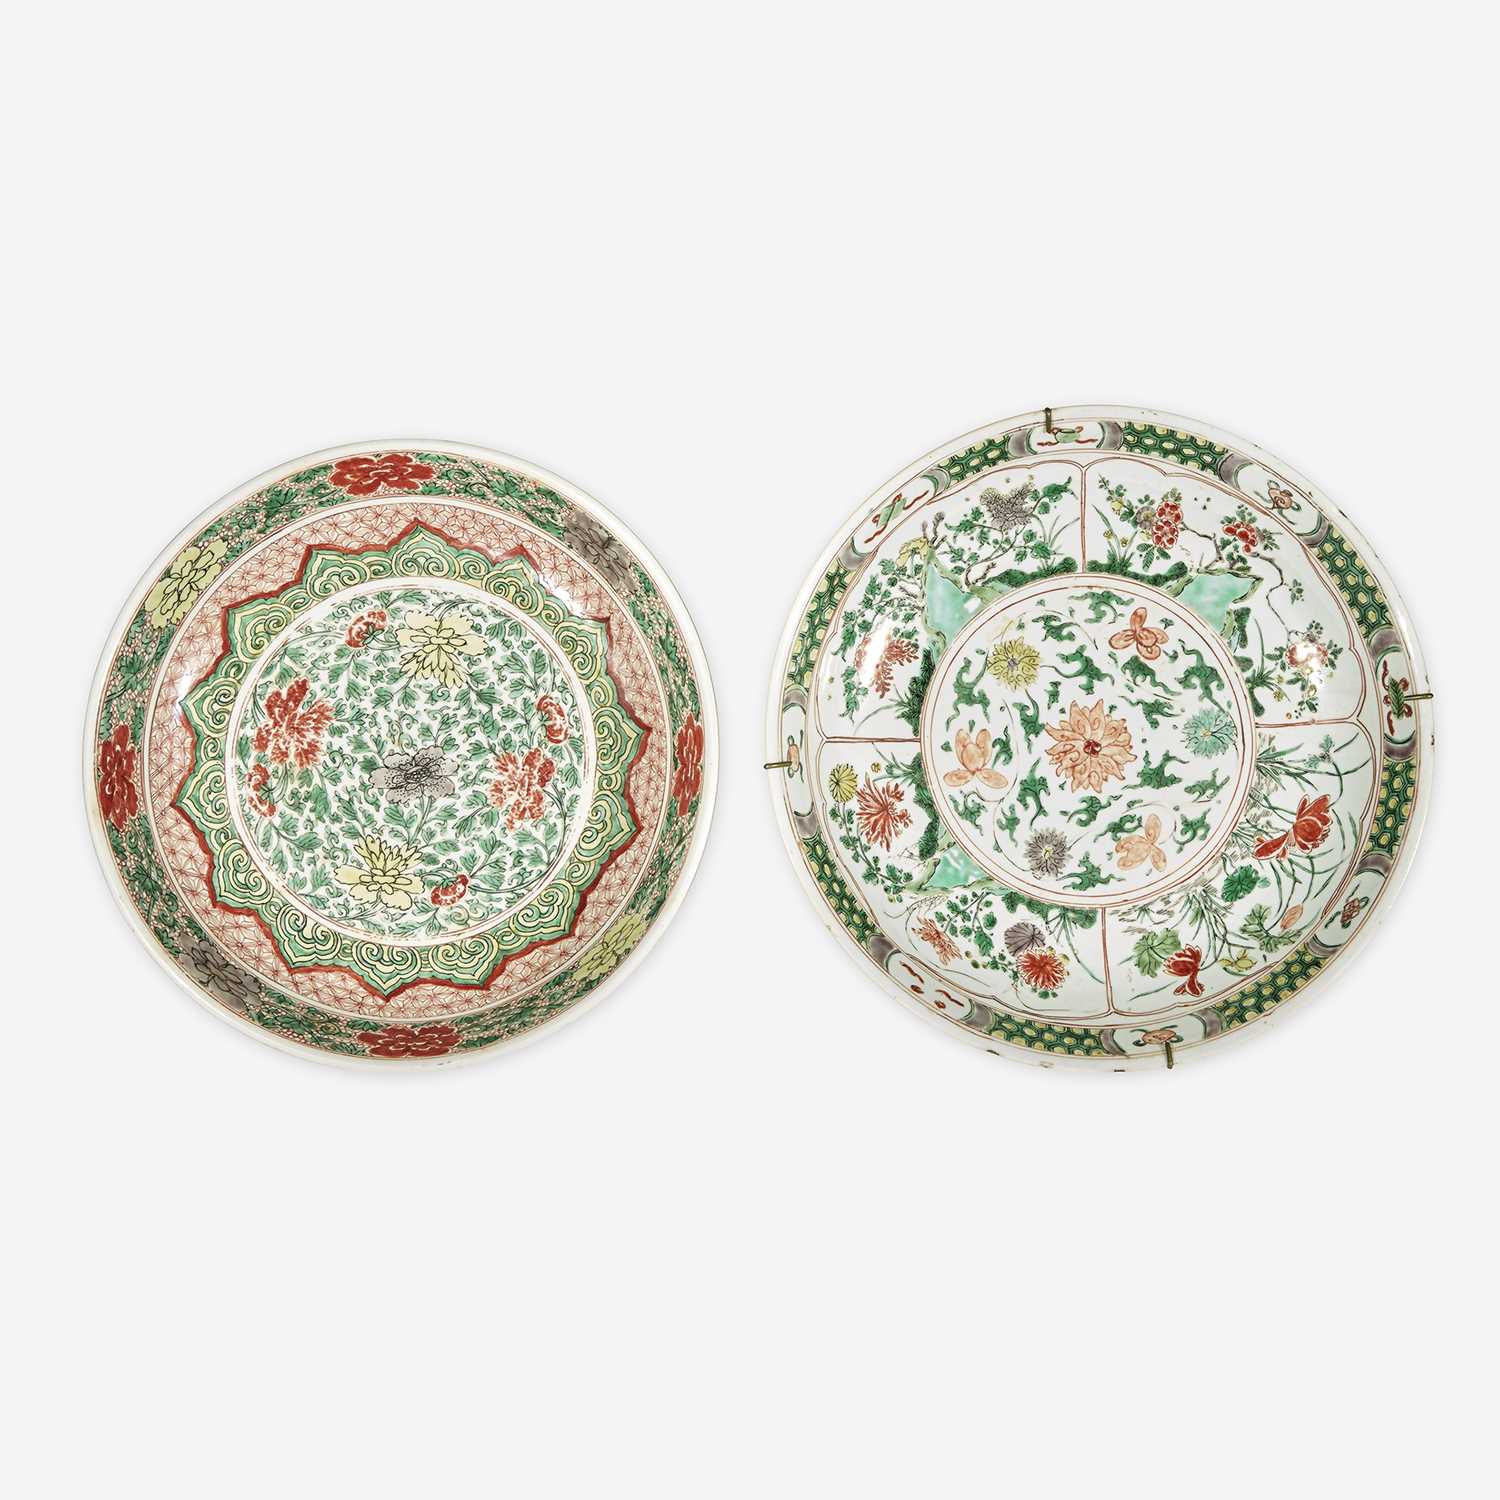 Lot 81 - Two Chinese Famille Verte-Decorated Porcelain Dishes